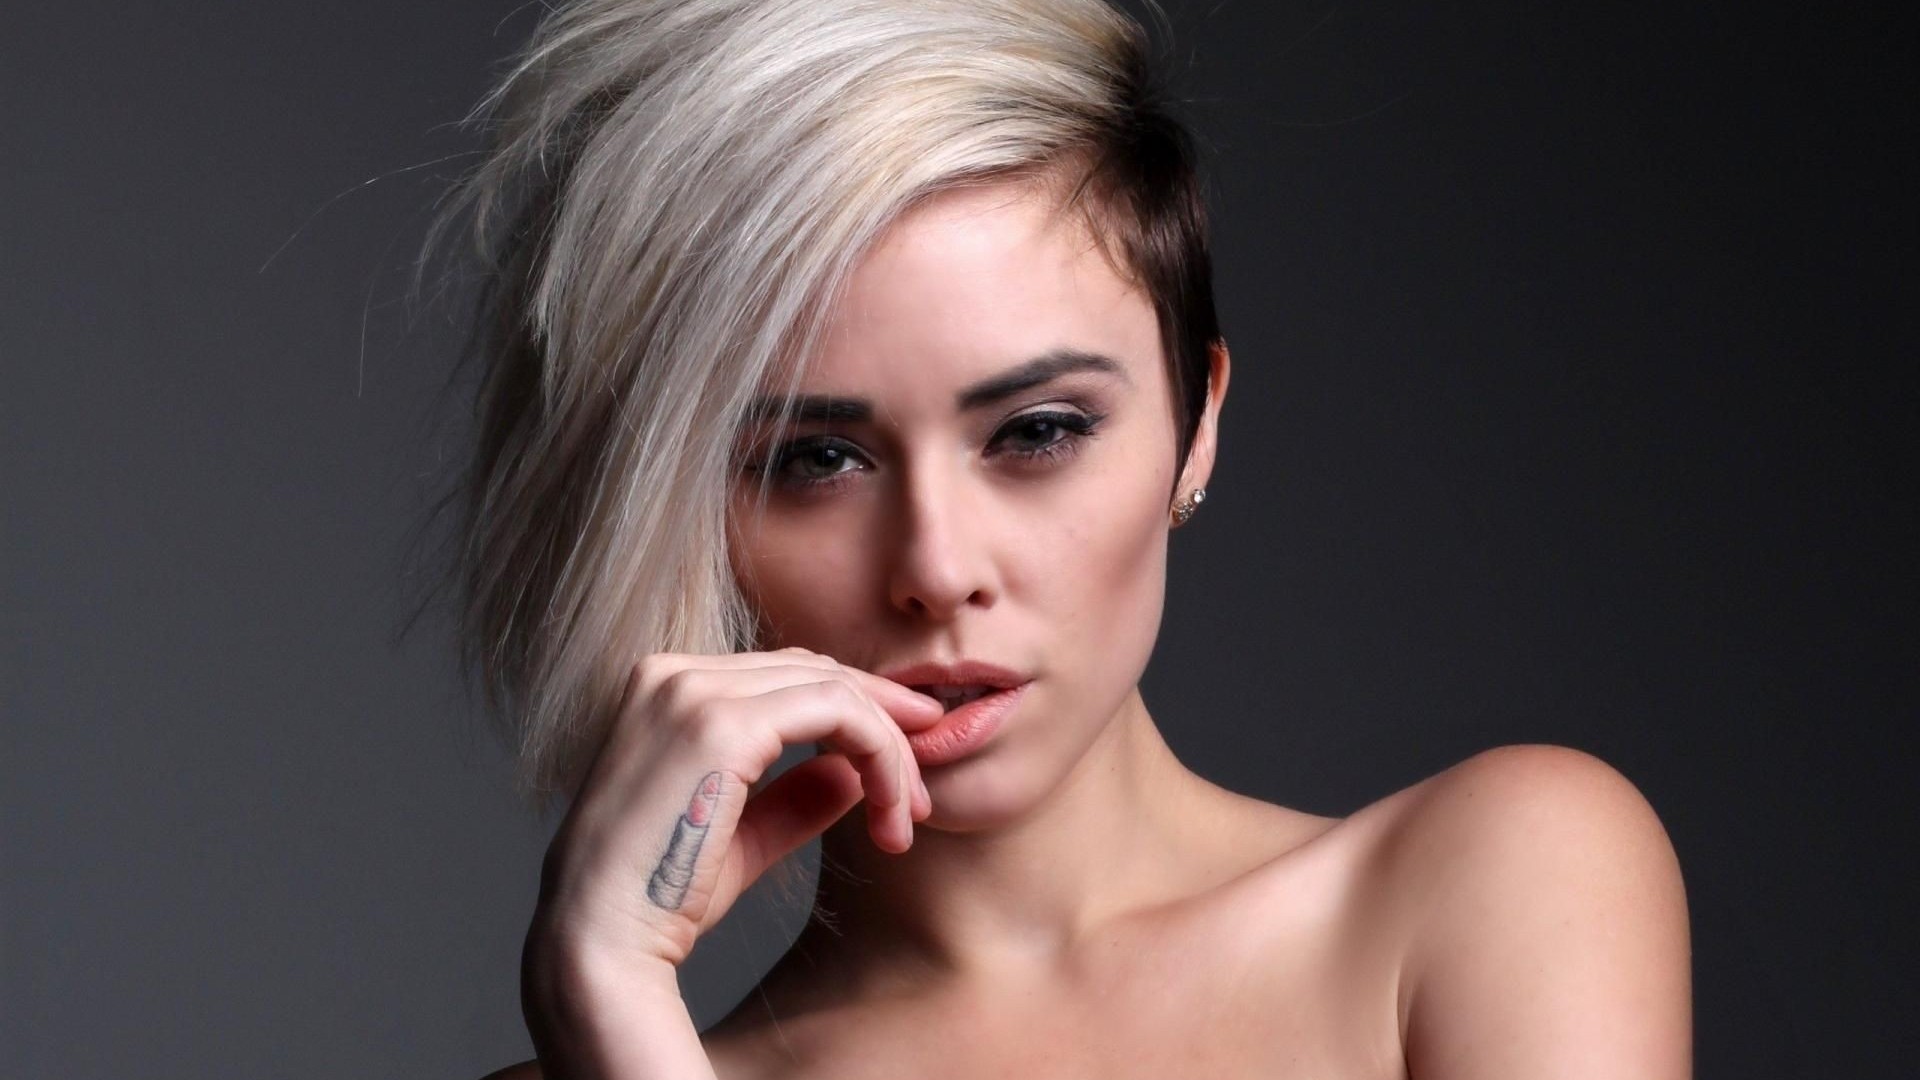 30 Best Short Hairstyle For Women Images, Photos, Reviews